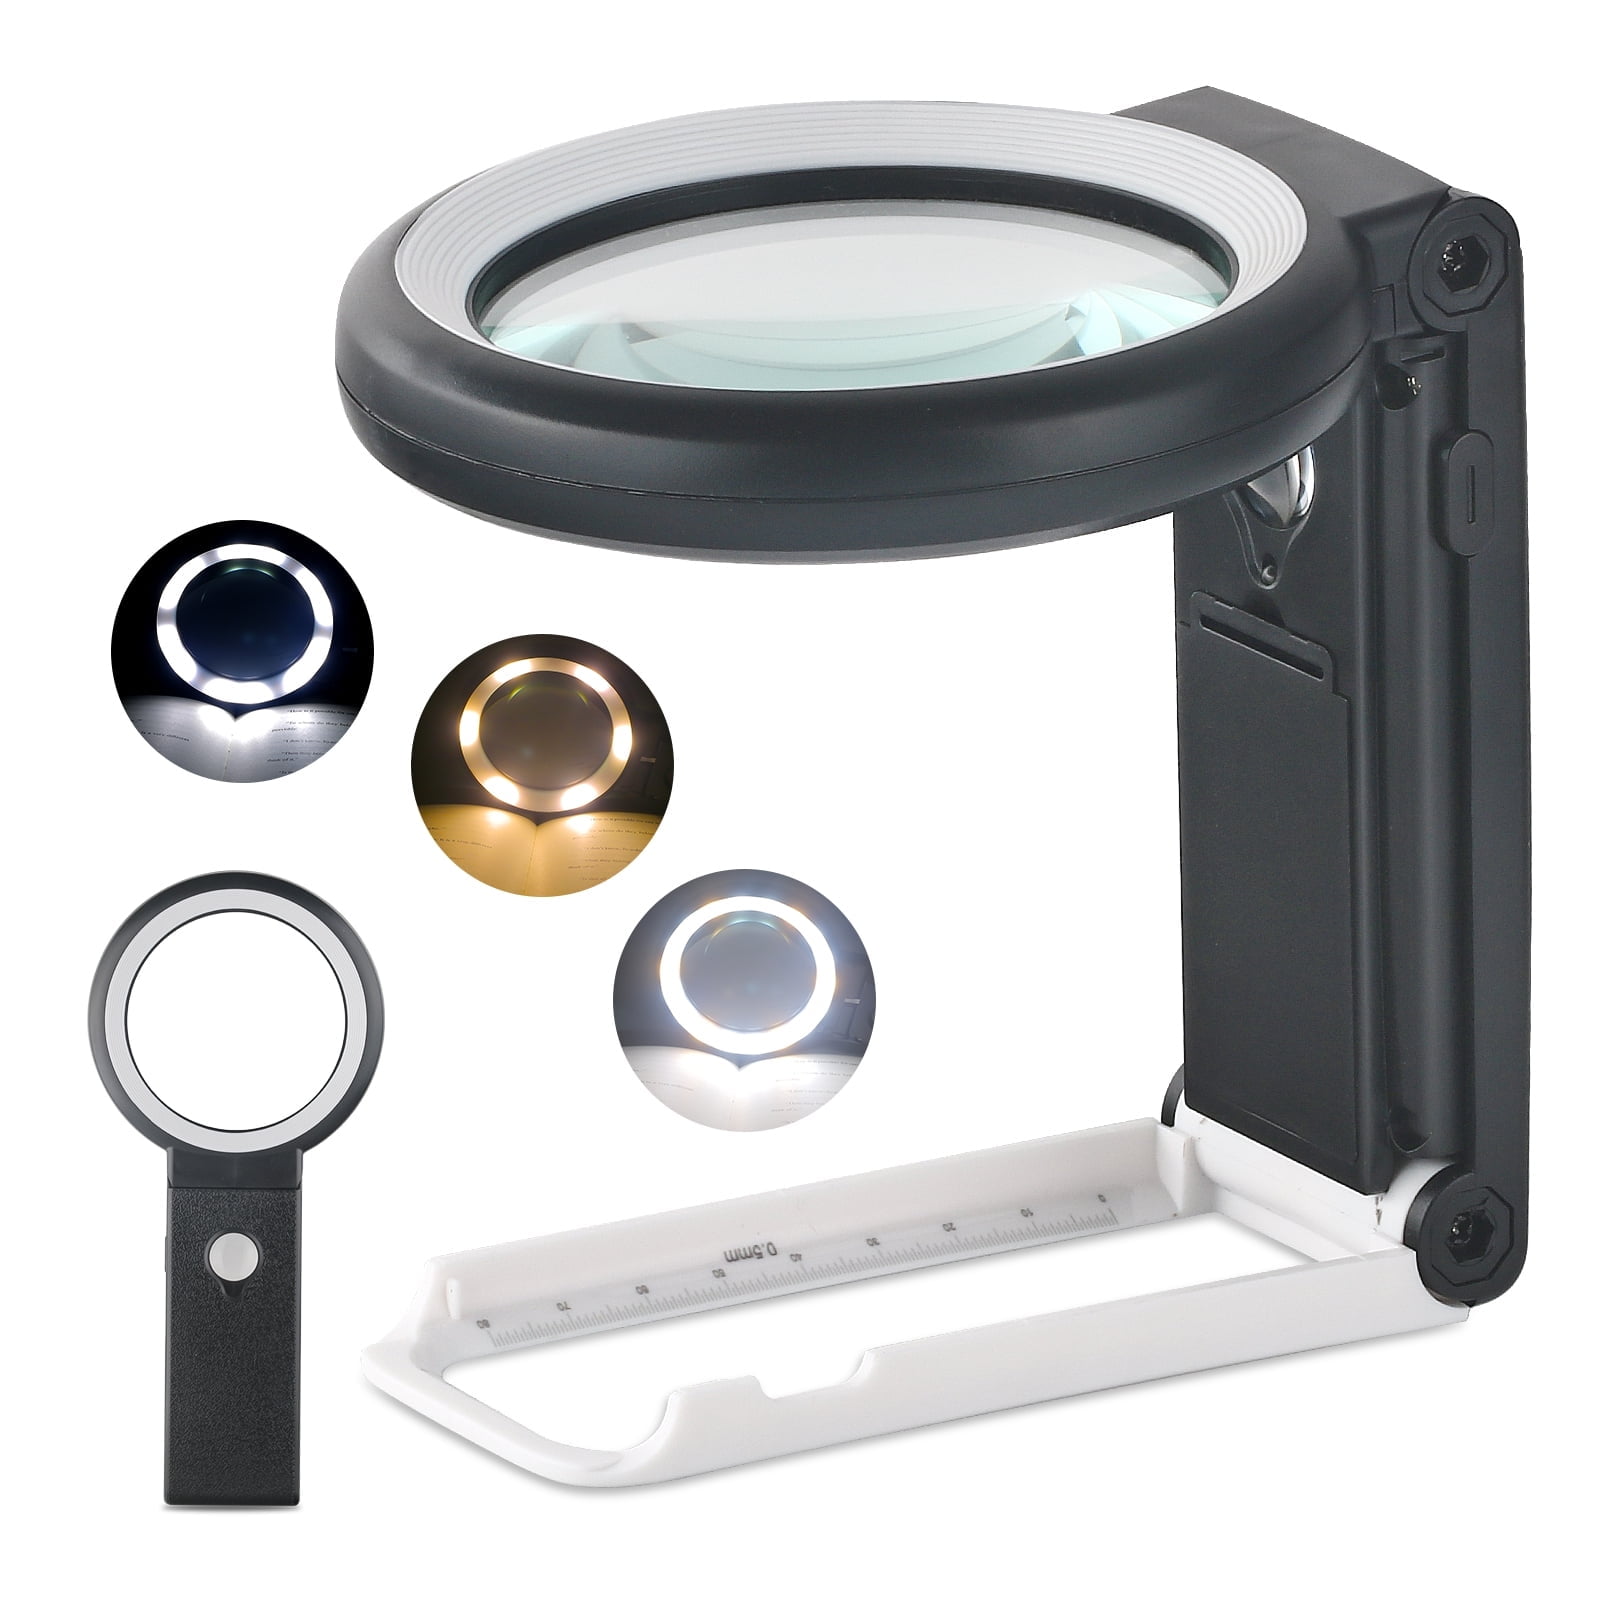 CRIOO Magnifying Glass with Led Light, 30X, 18 LED, 3 Light Modes, Handheld  Illuminated Magnifier Glass, Gifts for Kids Seniors Macular Degeneratio